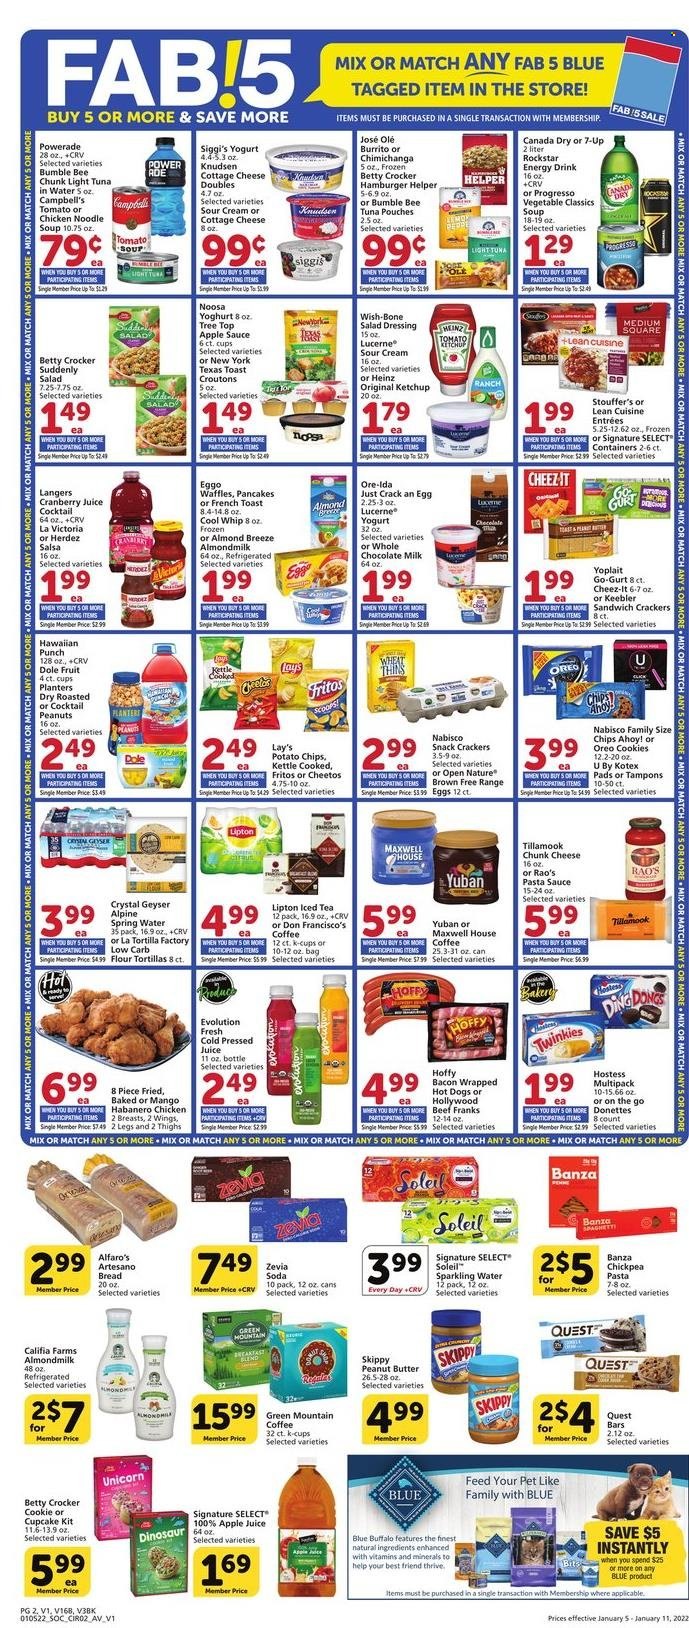 thumbnail - Albertsons Flyer - 01/05/2022 - 01/11/2022 - Sales products - tortillas, flour tortillas, waffles, Dole, tuna, Campbell's, spaghetti, tomato soup, hot dog, pasta sauce, soup, Bumble Bee, noodles cup, burrito, noodles, Progresso, Lean Cuisine, habanero chicken, bacon, cottage cheese, chunk cheese, Oreo, yoghurt, Yoplait, almond milk, milk, Almond Breeze, Cool Whip, sour cream, Stouffer's, Ore-Ida, cookies, milk chocolate, chocolate, snack, crackers, Chips Ahoy!, Keebler, Fritos, potato chips, Cheetos, Lay’s, Thins, Cheez-It, croutons, tuna in water, Heinz, light tuna, rice, salad dressing, ketchup, dressing, salsa, apple sauce, peanut butter, peanuts, Planters, apple juice, Canada Dry, cranberry juice, Powerade, juice, energy drink, Lipton, ice tea, 7UP, Rockstar, spring water, soda, sparkling water, Maxwell House, coffee, coffee capsules, K-Cups, Green Mountain, Fab, Kotex, tampons, Blue Buffalo, dinosaur. Page 2.